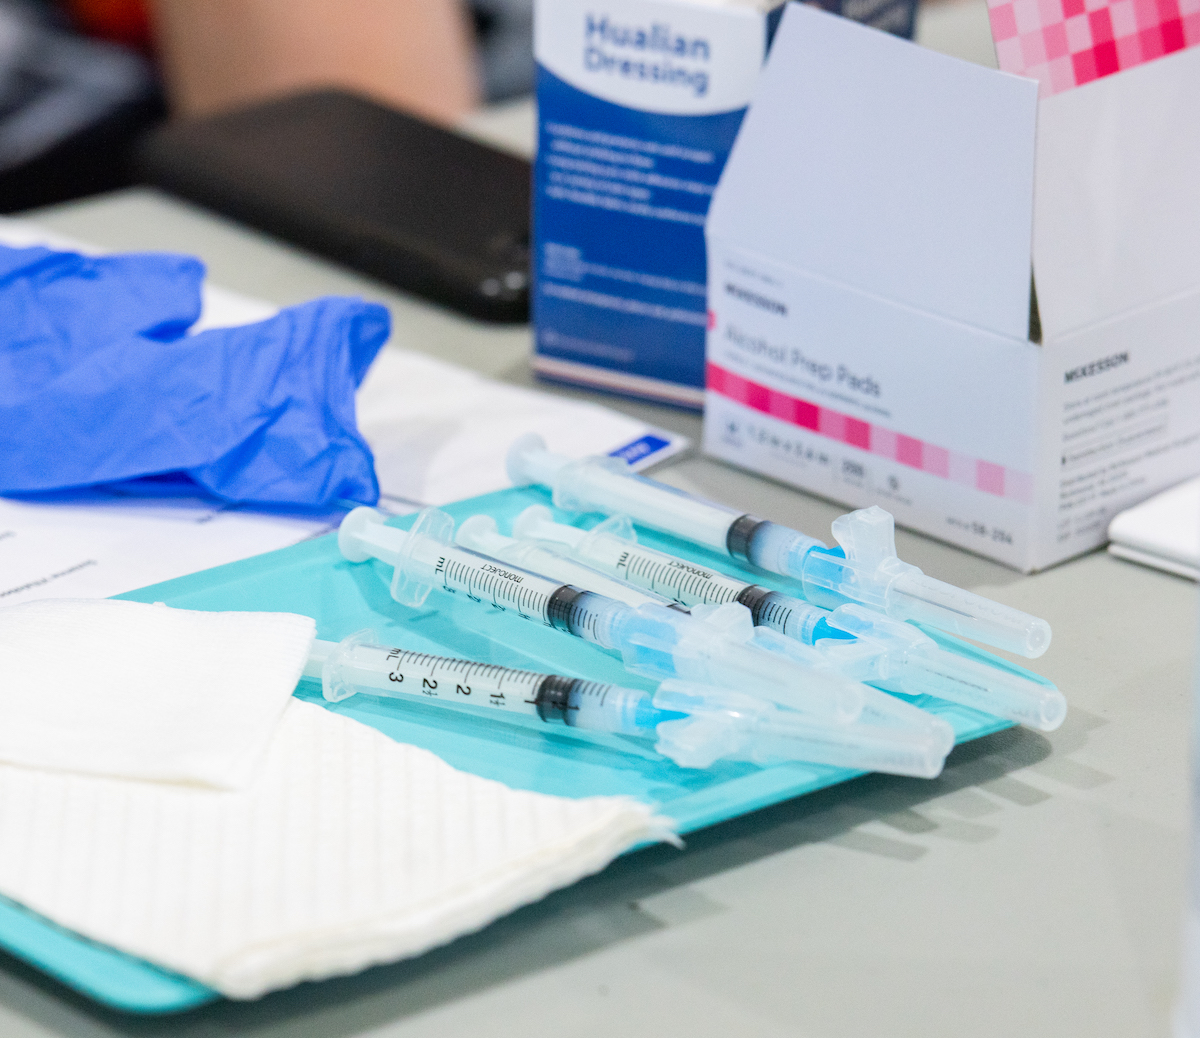 needles of COVID-19 vaccinations are ready on a table, for COVID-19 weekly update.